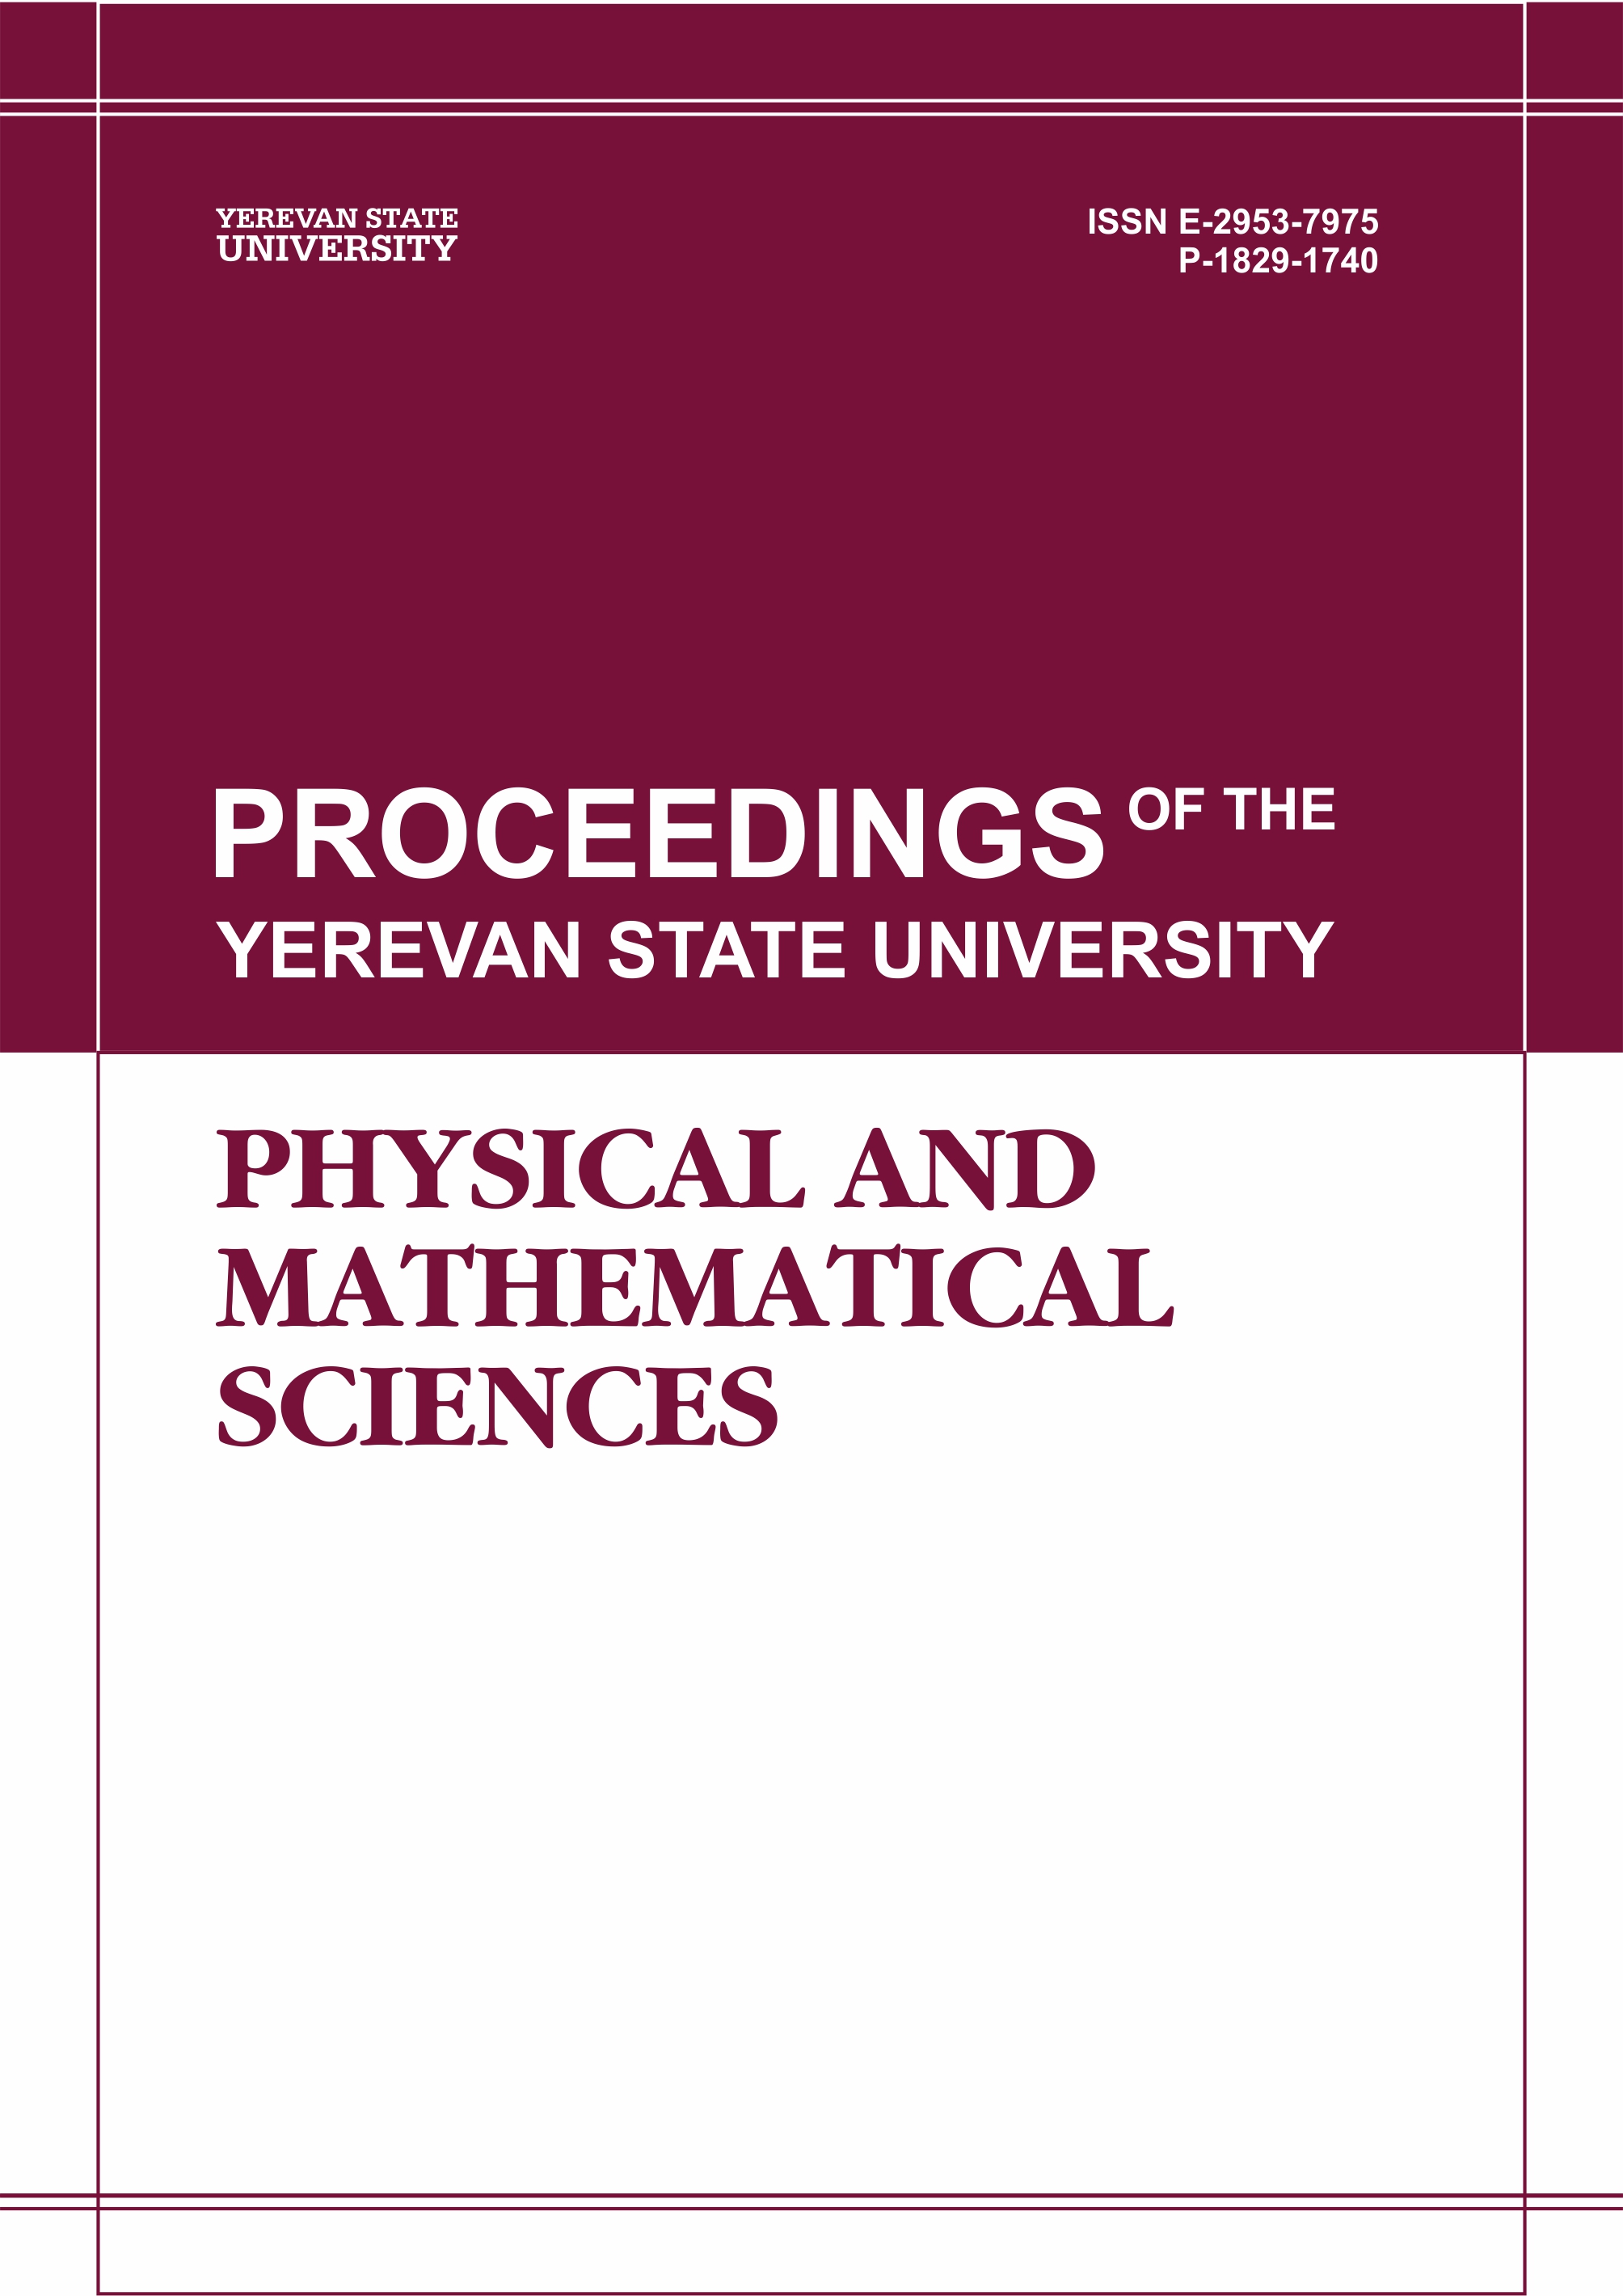  Proceedings of the YSU A: Physical and Mathematical Sciences